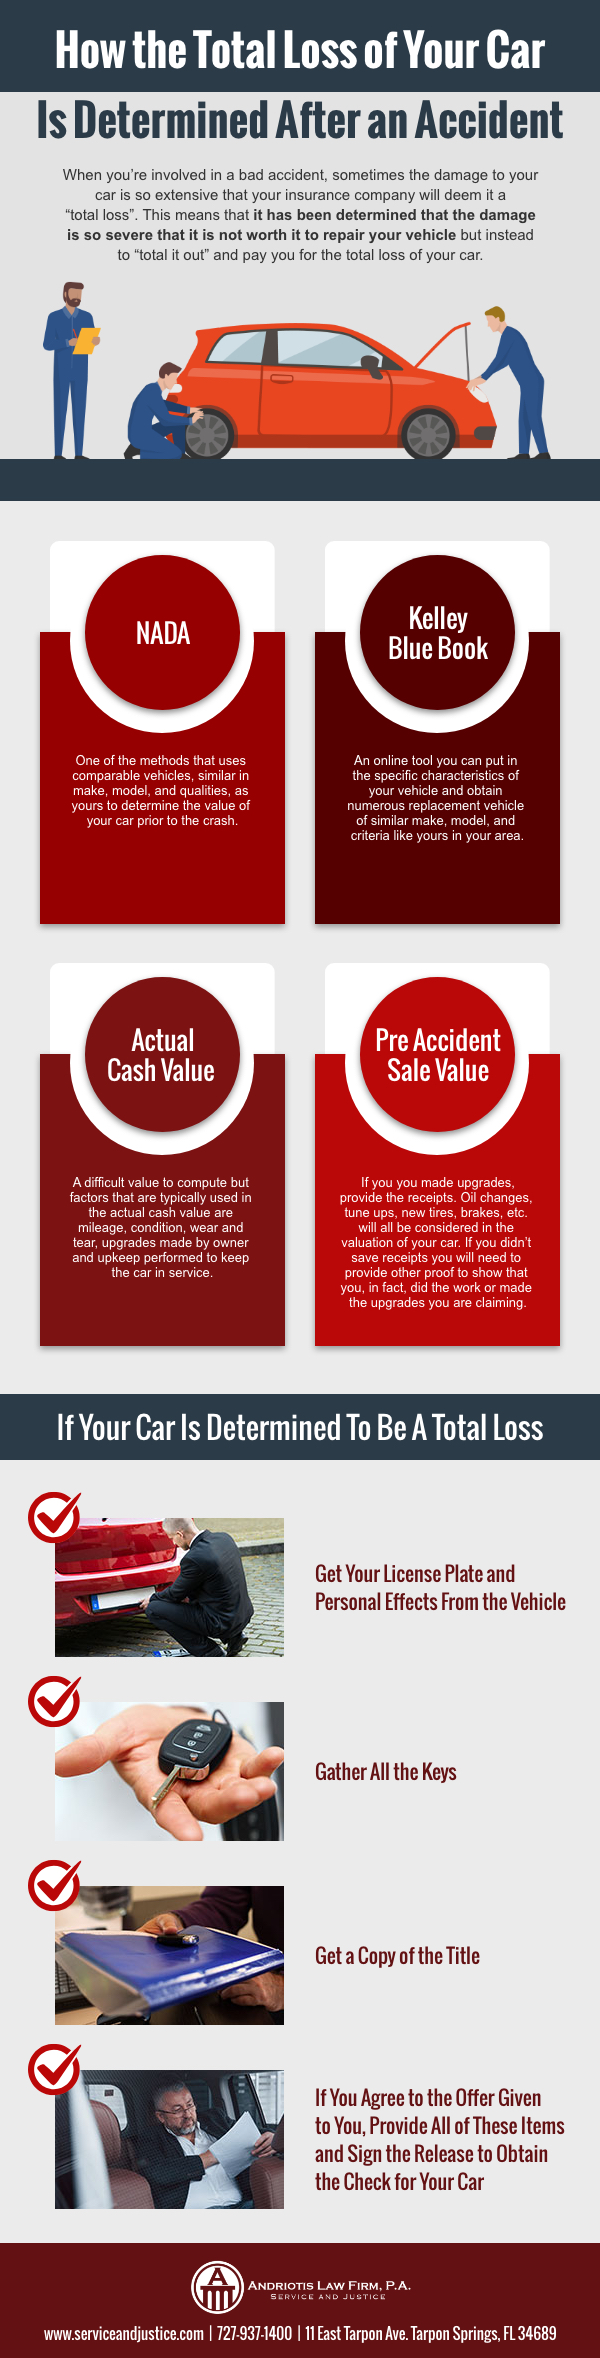 What to do if your car is a total loss after an auto accident